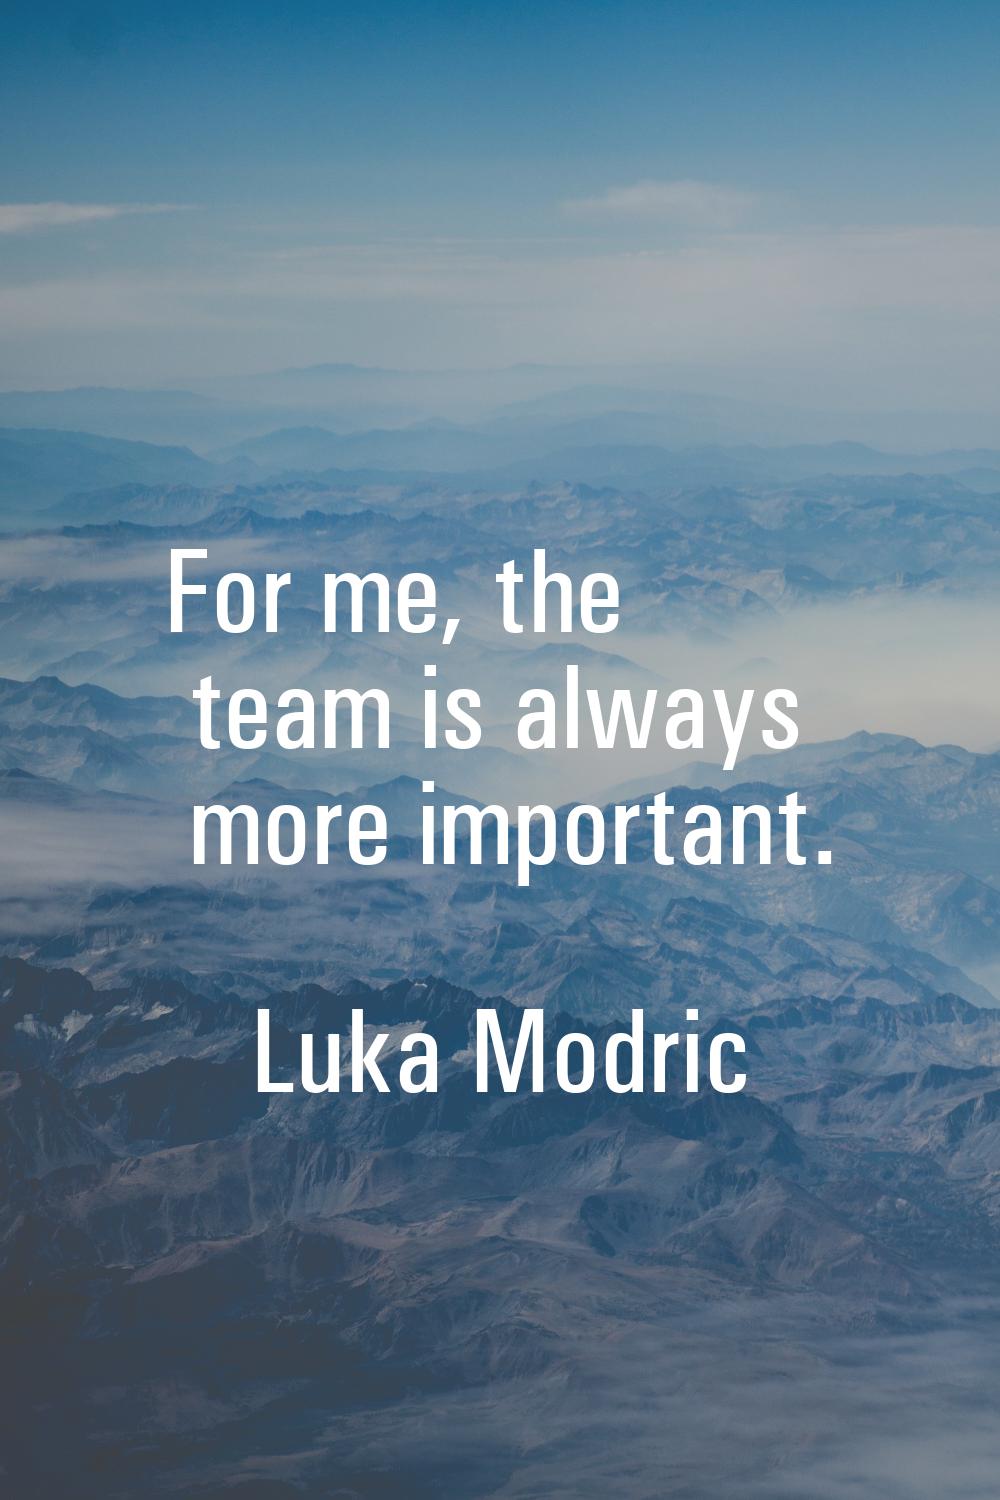 For me, the team is always more important.